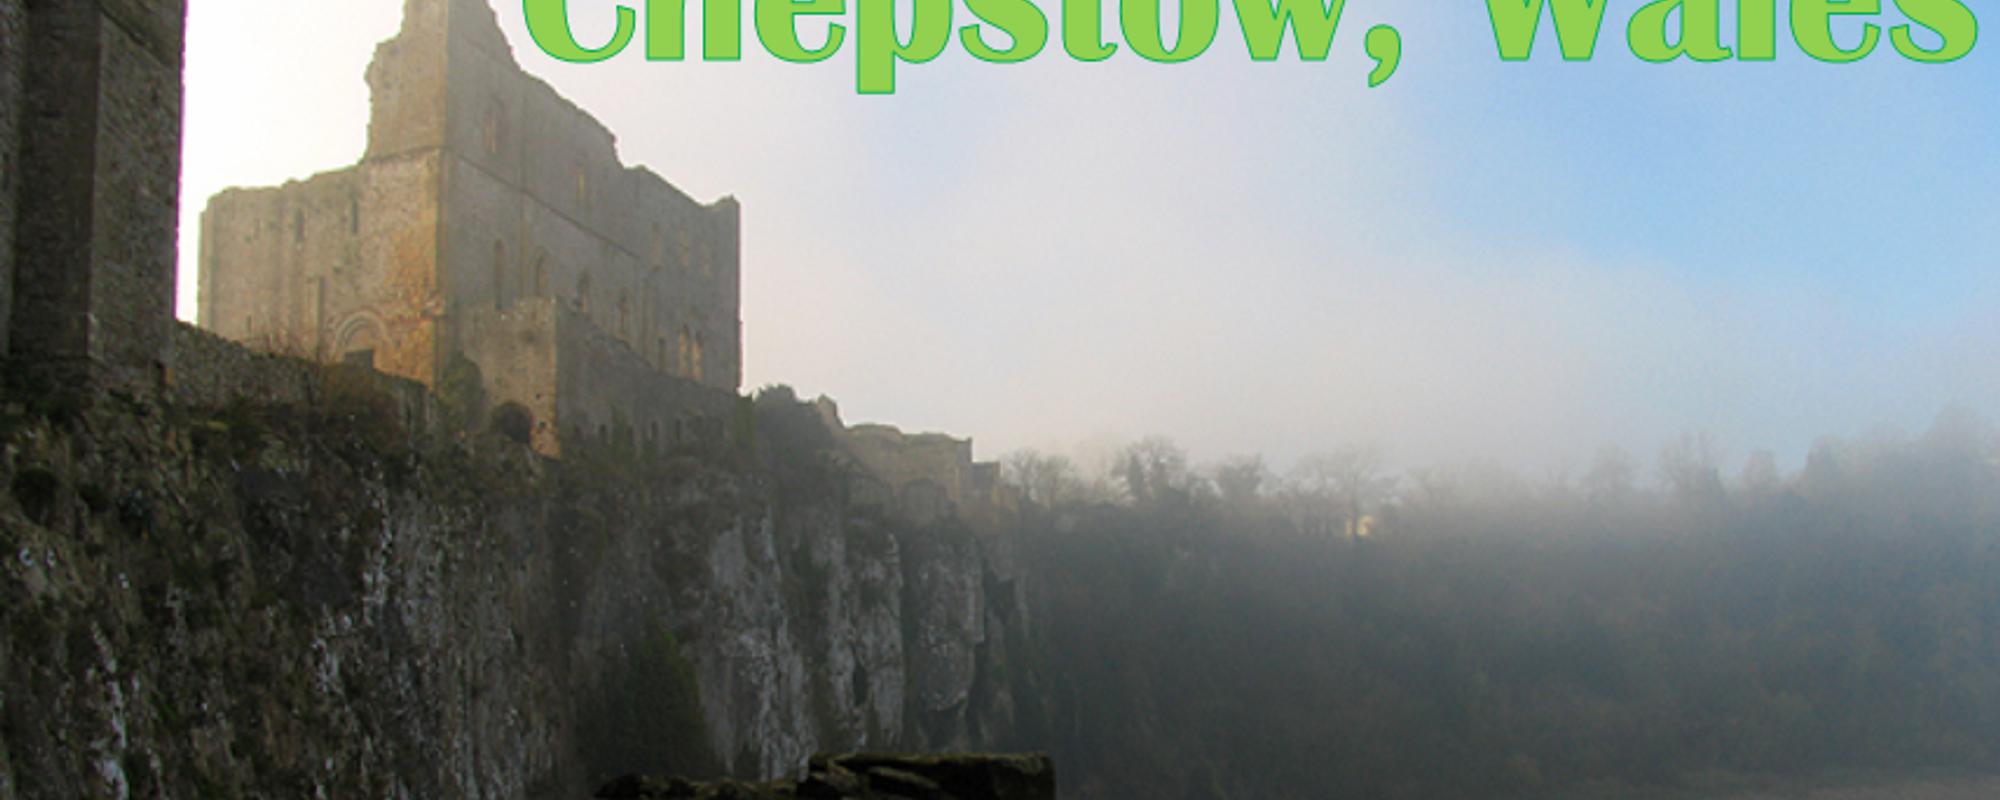 Visiting Chepstow, Wales